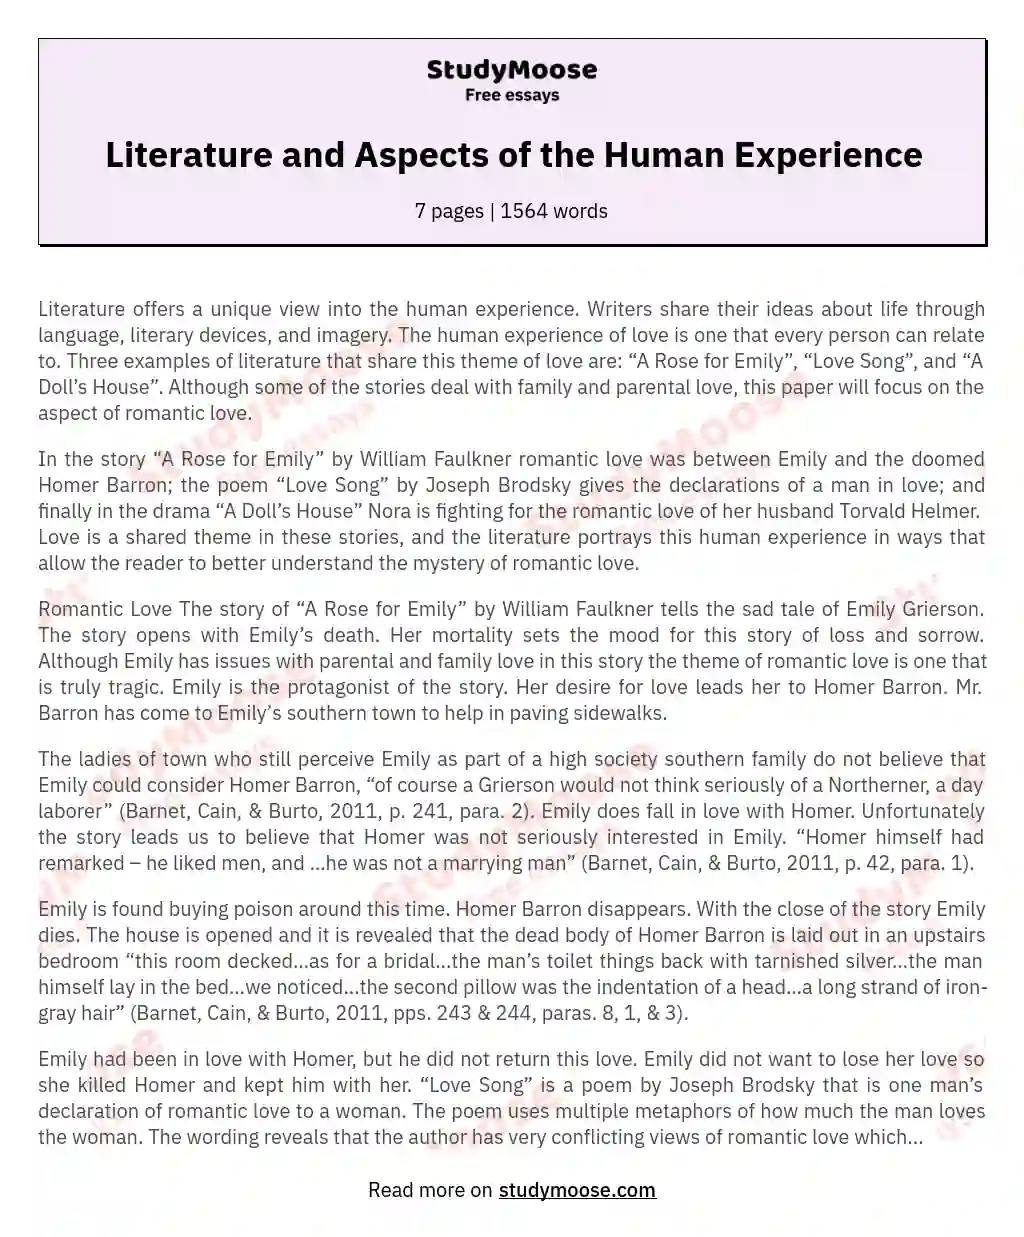 Literature and Aspects of the Human Experience essay